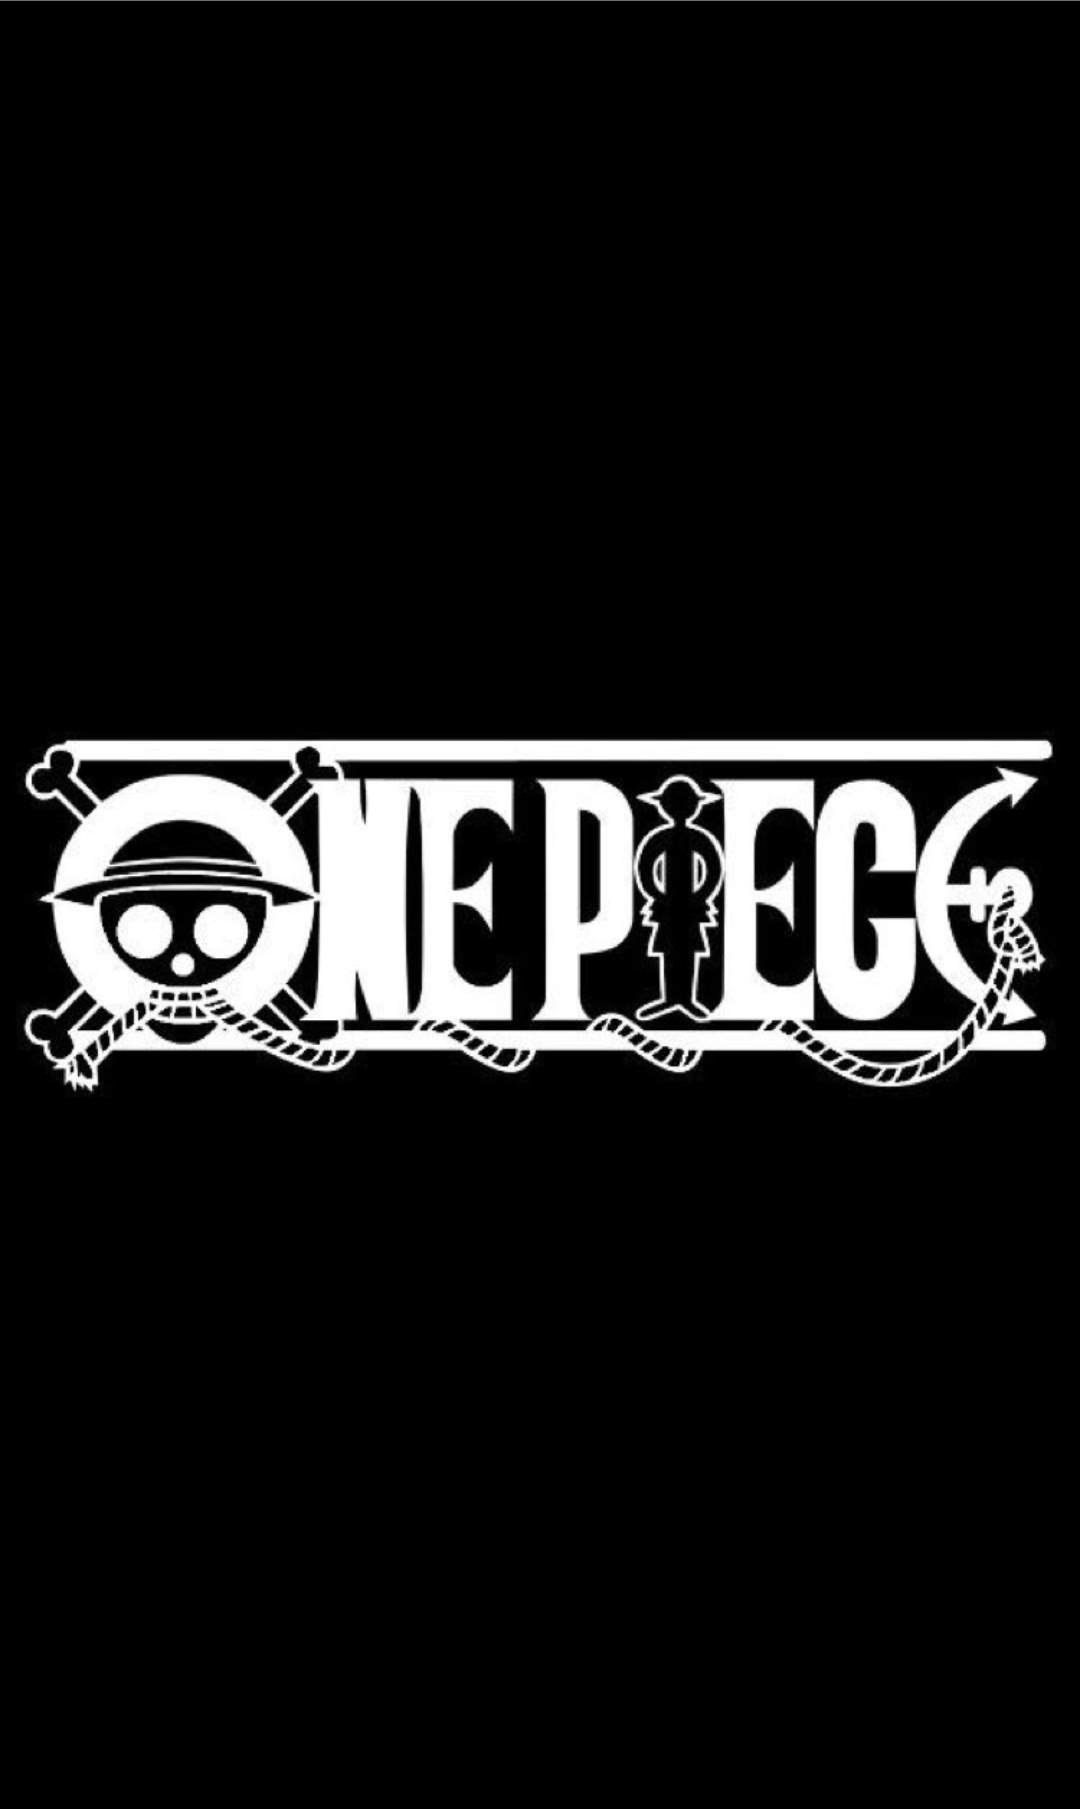 One Piece Wallpapers Hd Logo wallpaper hd, One piece logo, Hd anime  wallpapers, one piece hd wallpaper - thirstymag.com